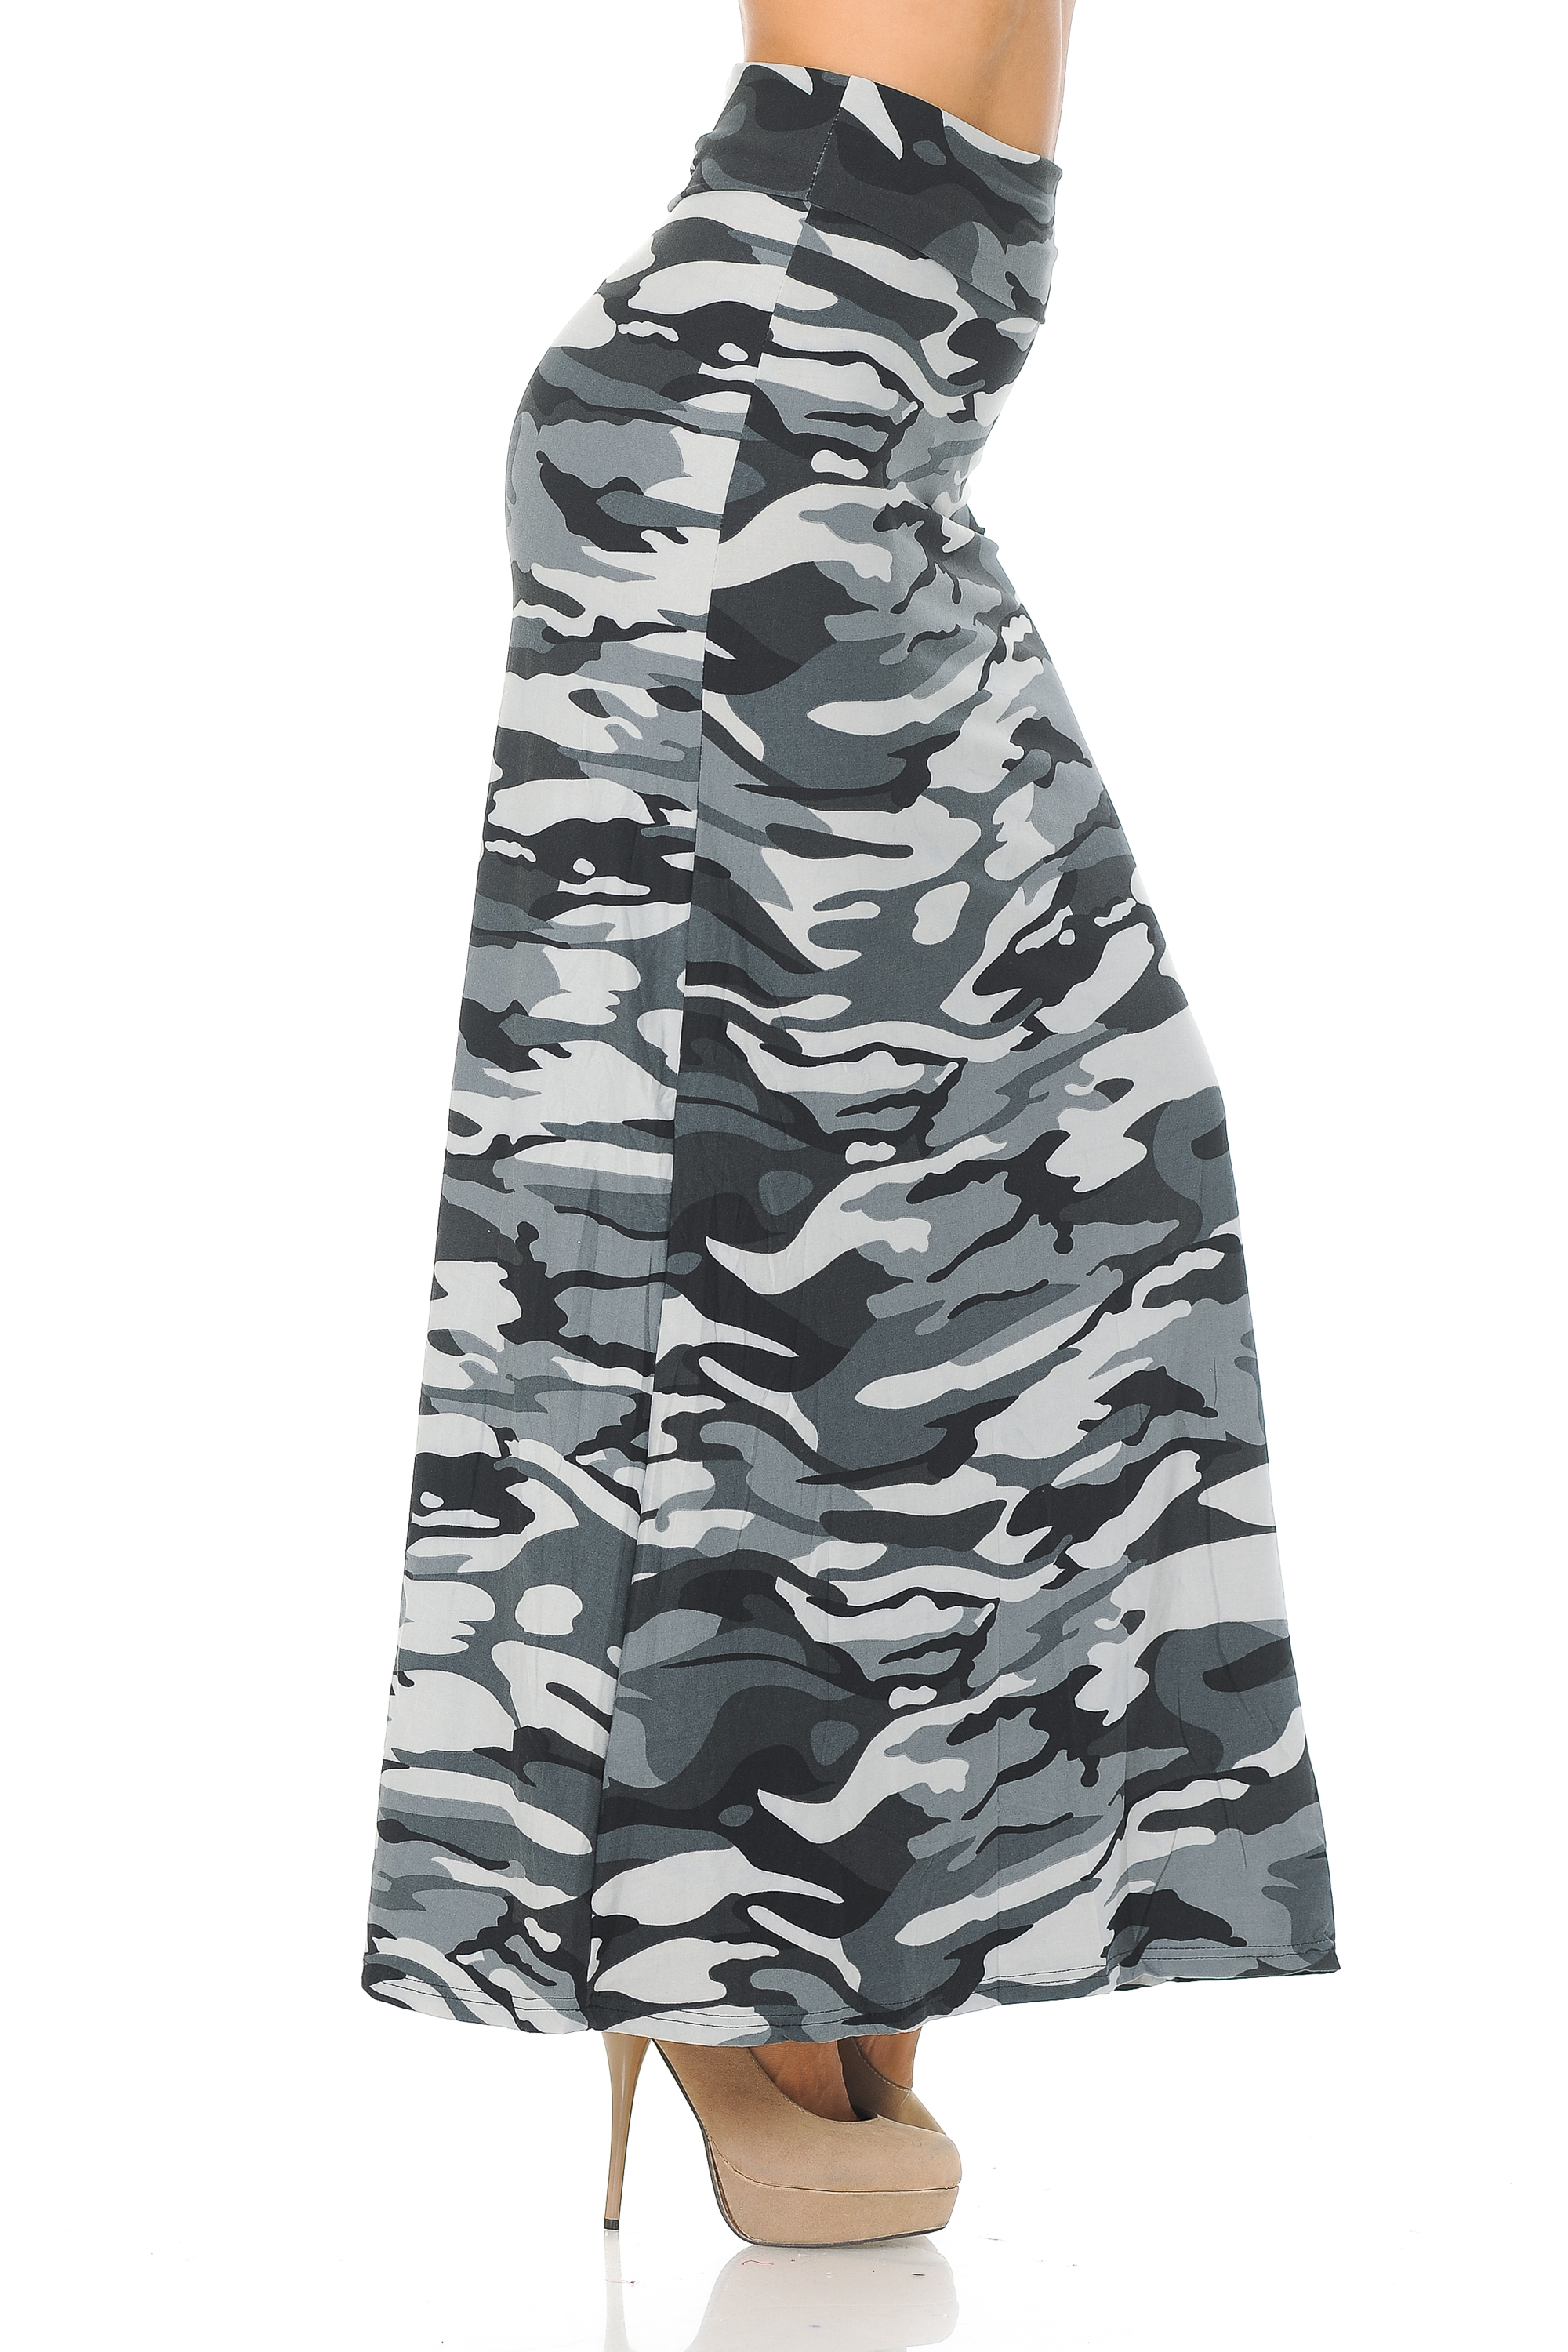 Wholesale Buttery Smooth Charcoal Camouflage Maxi Skirt